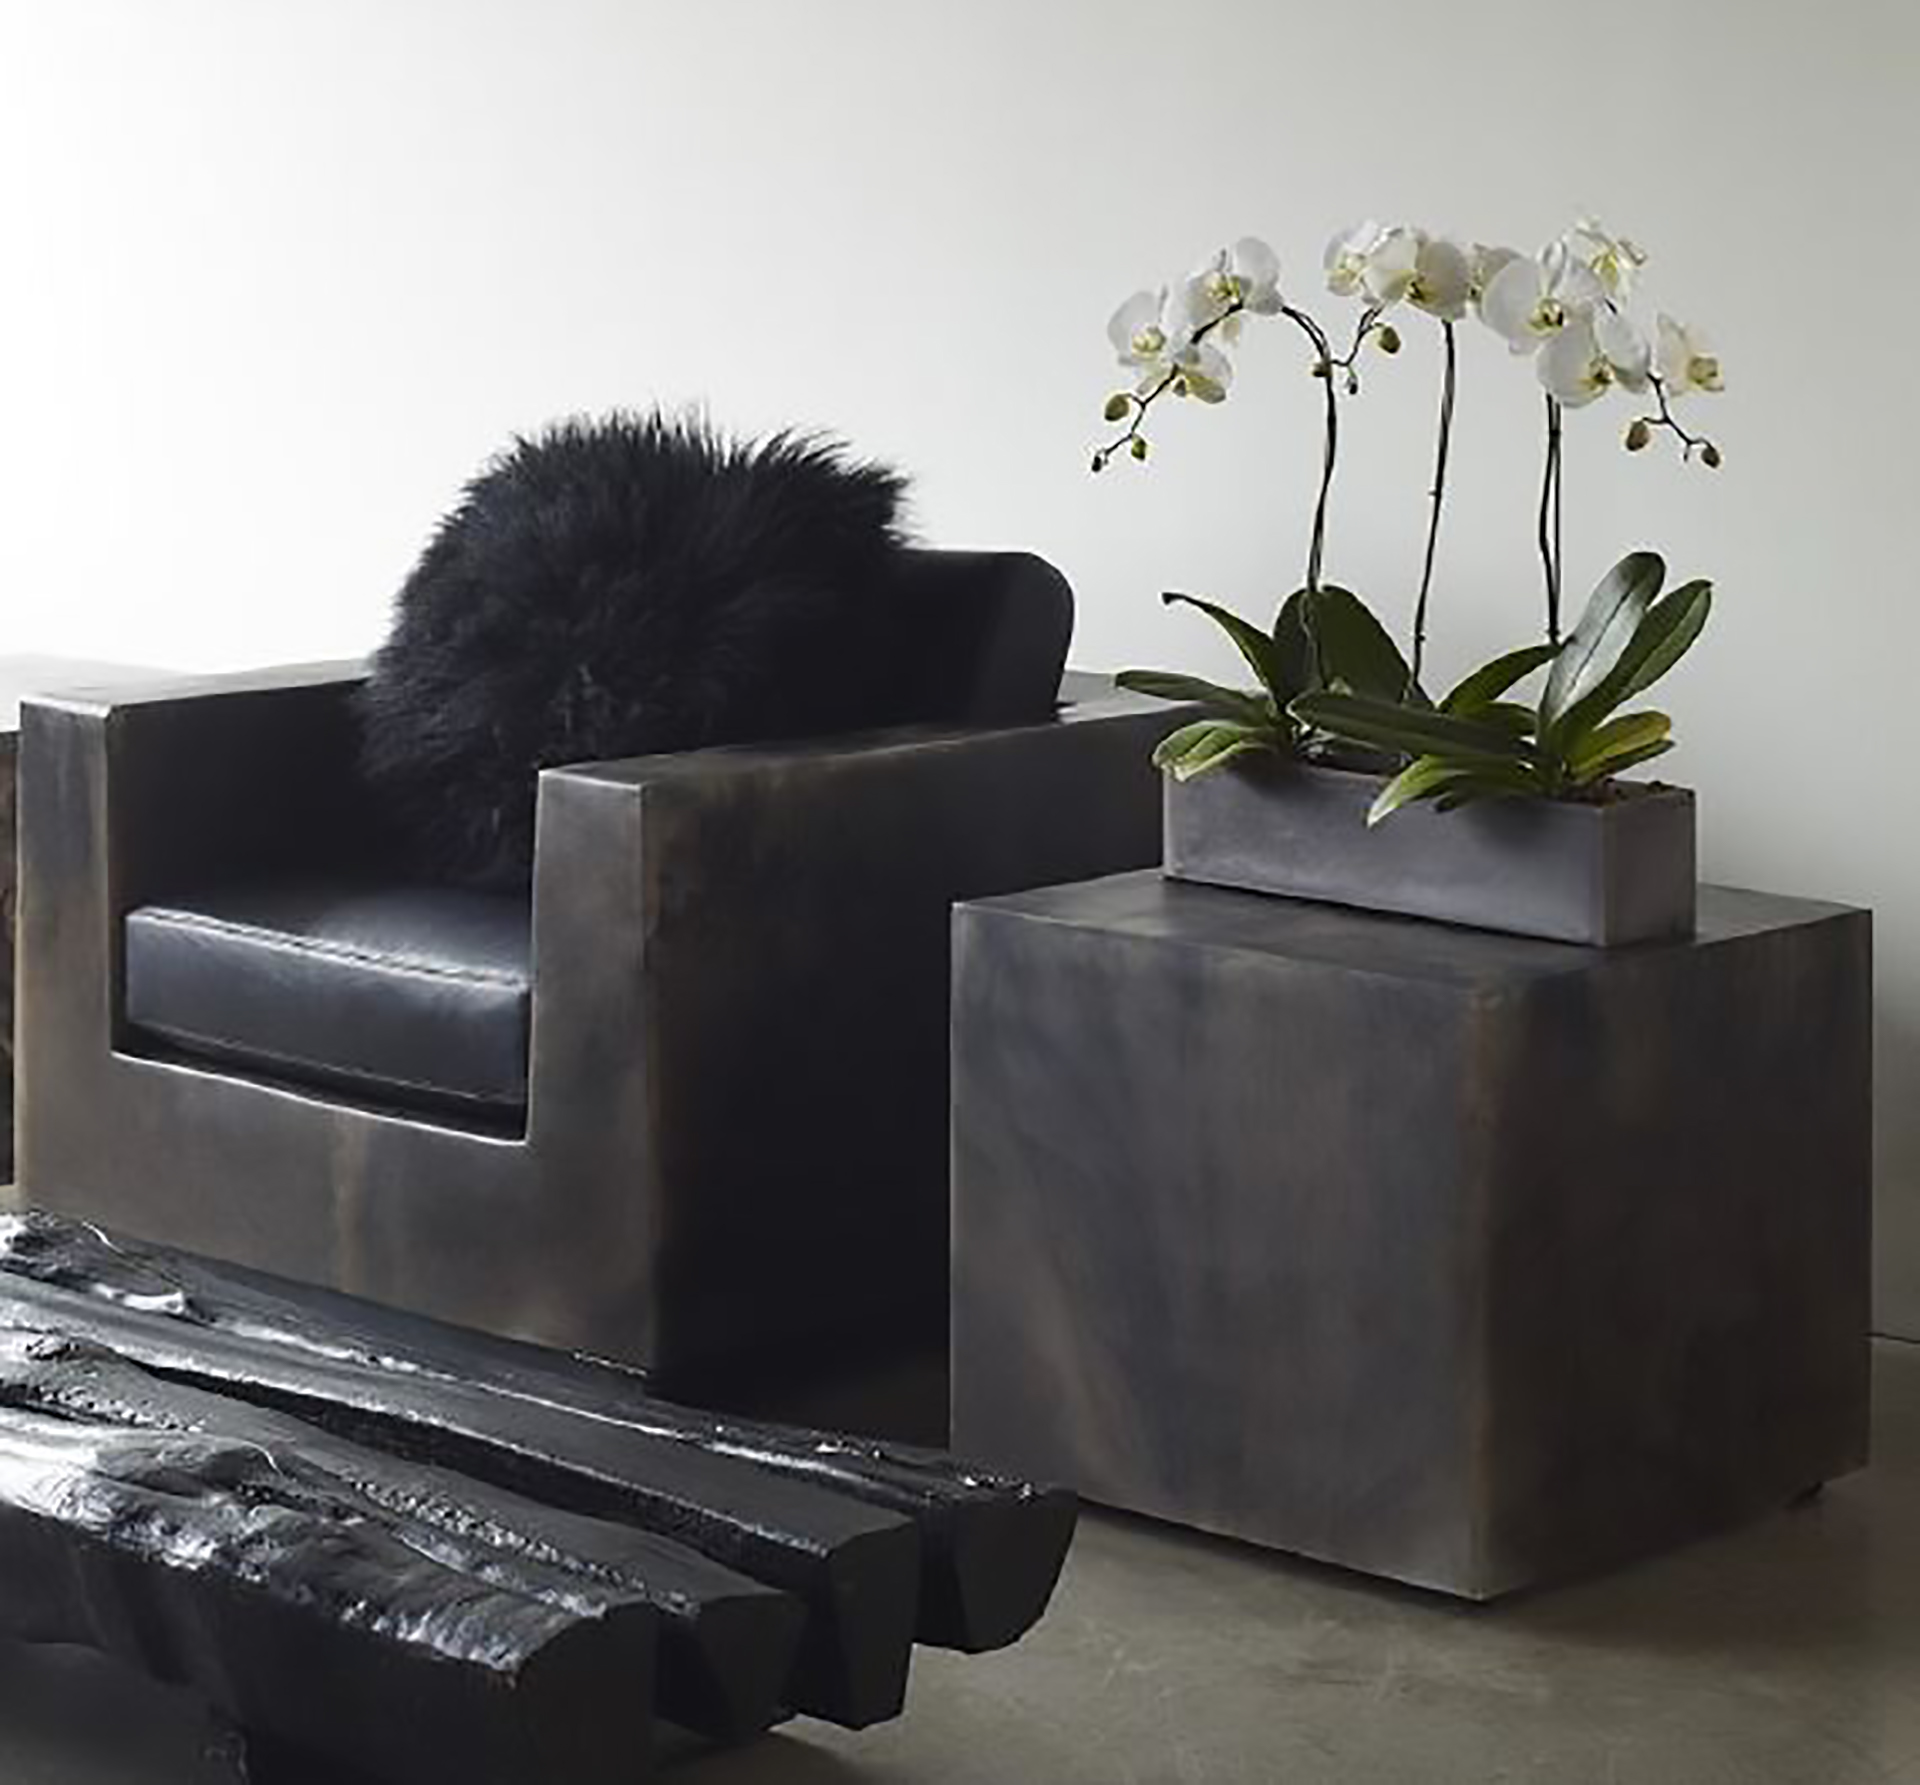 preston clay and black marble chair with fuzzy black cushion and resin side table with white orchid displayed